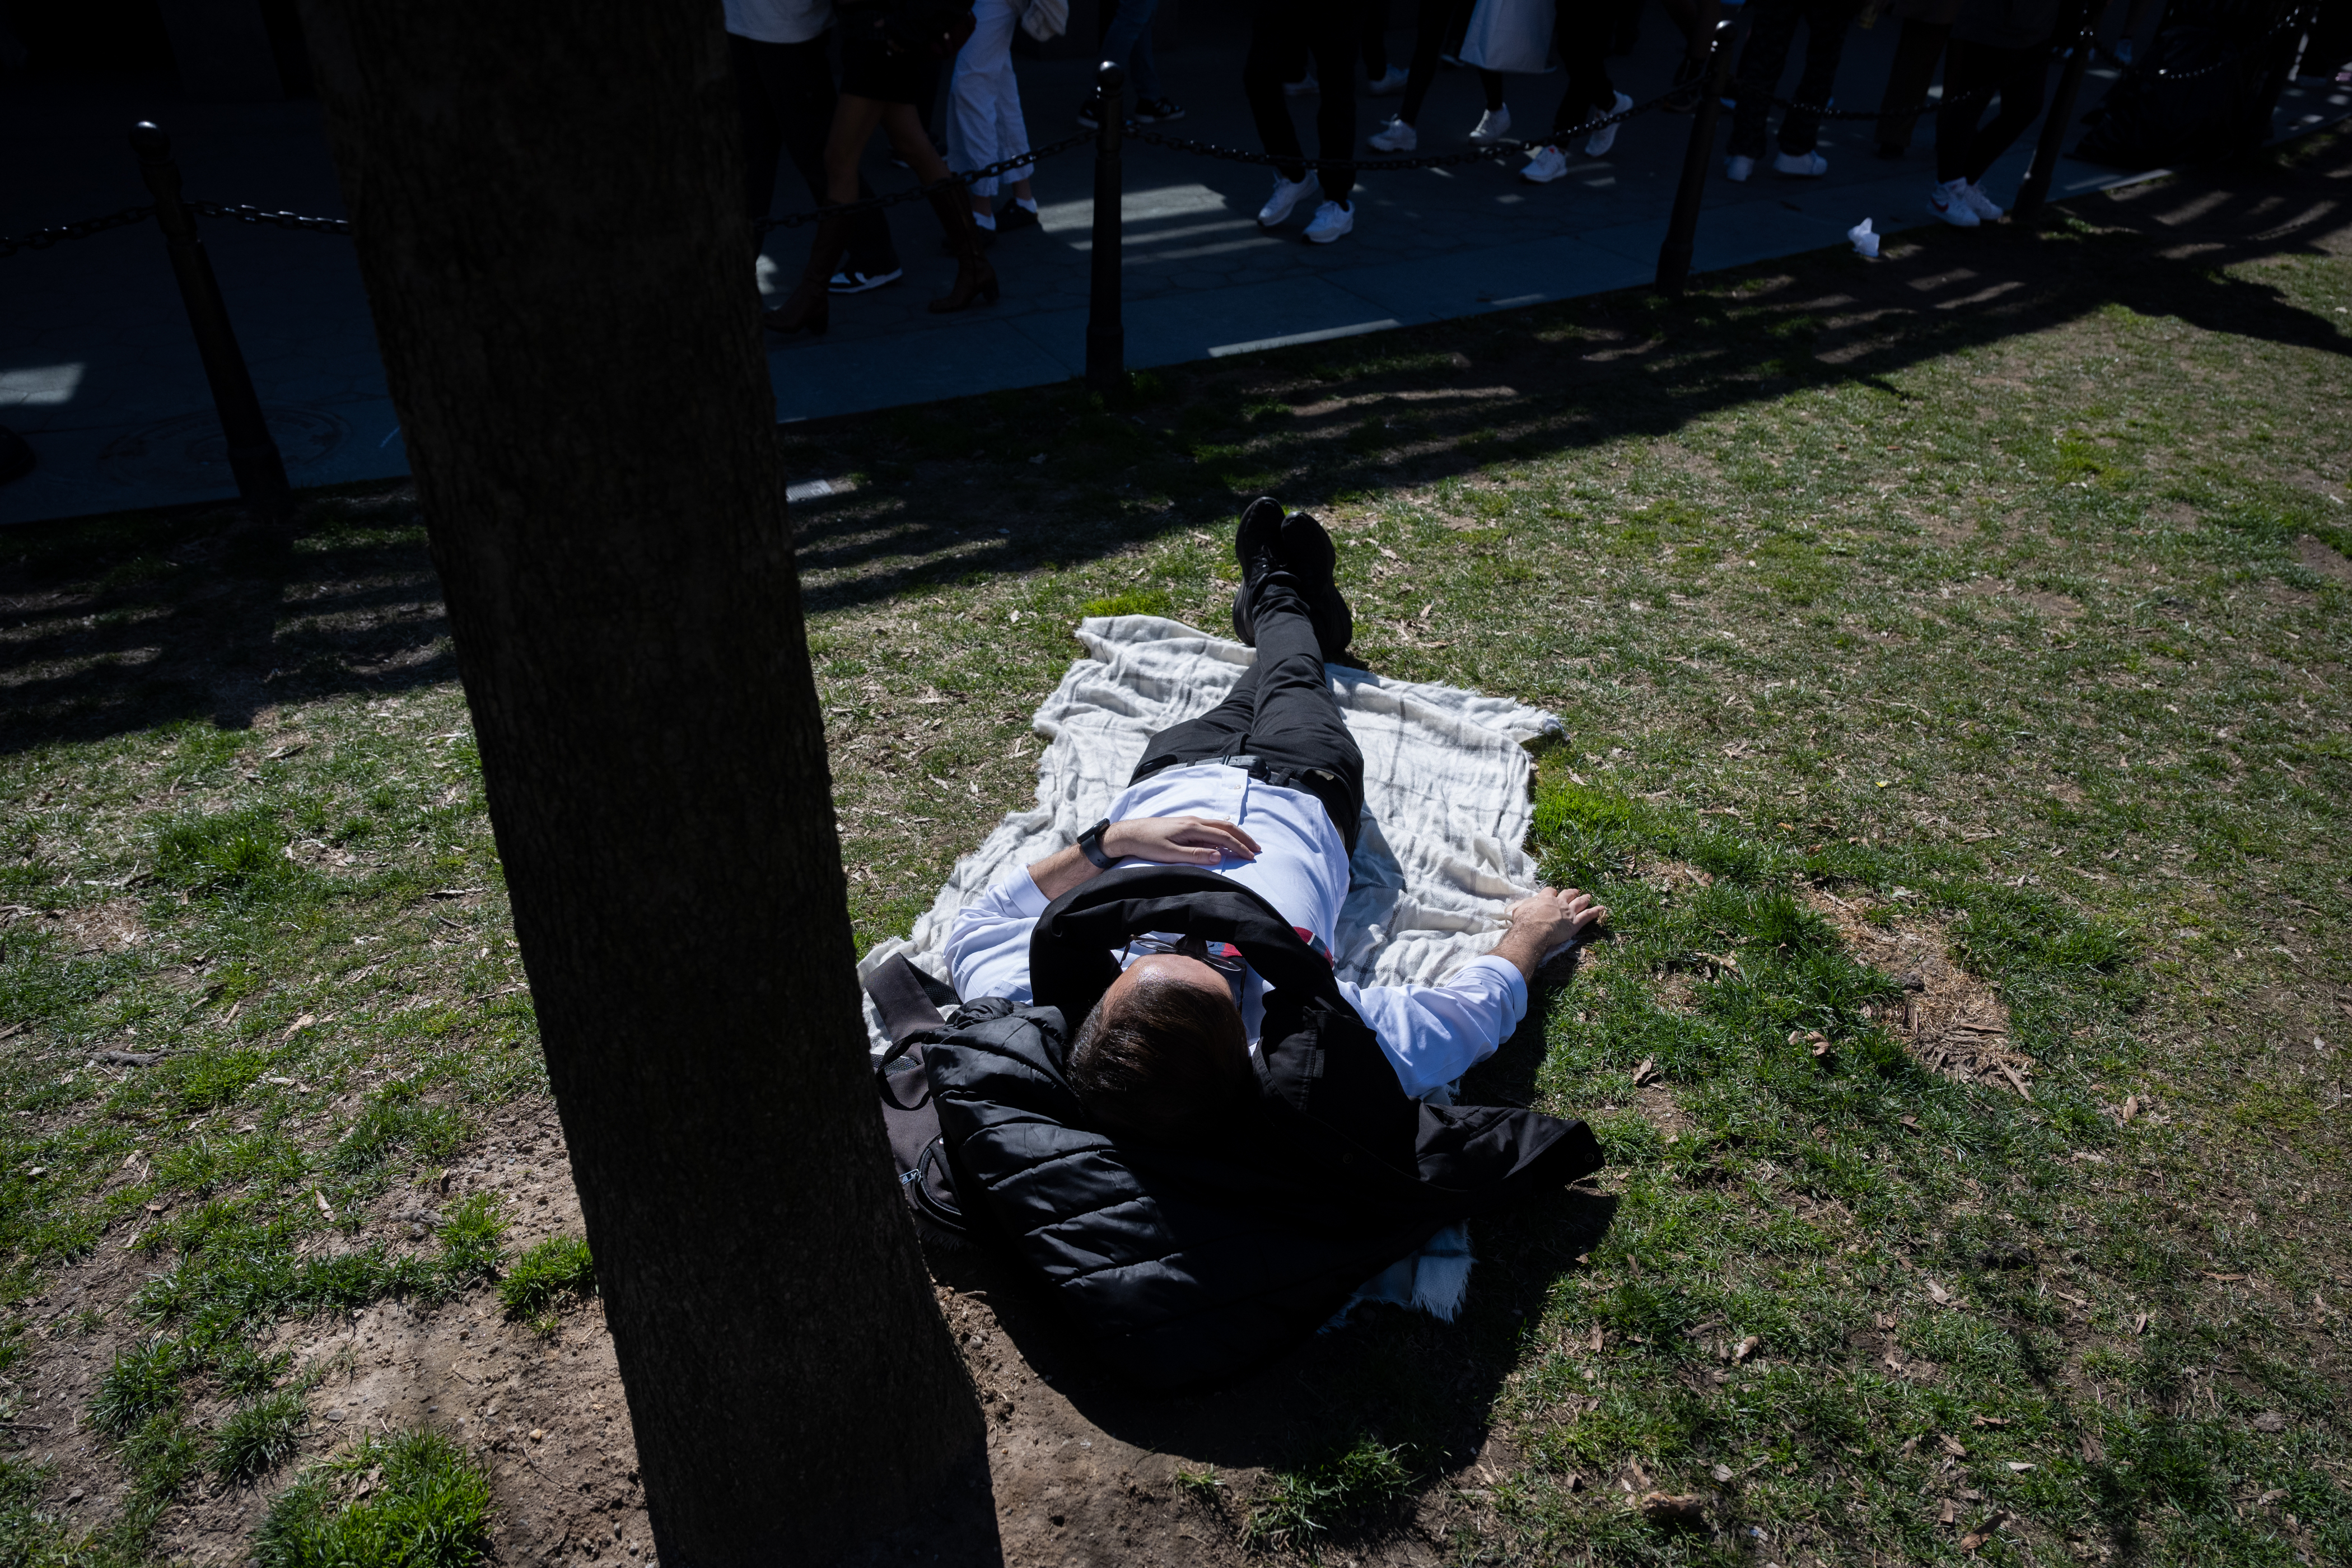 People lie on the grass in Washington Square Park as temperatures reach above 60 degrees during the first weekend of spring on March 26, 2023.